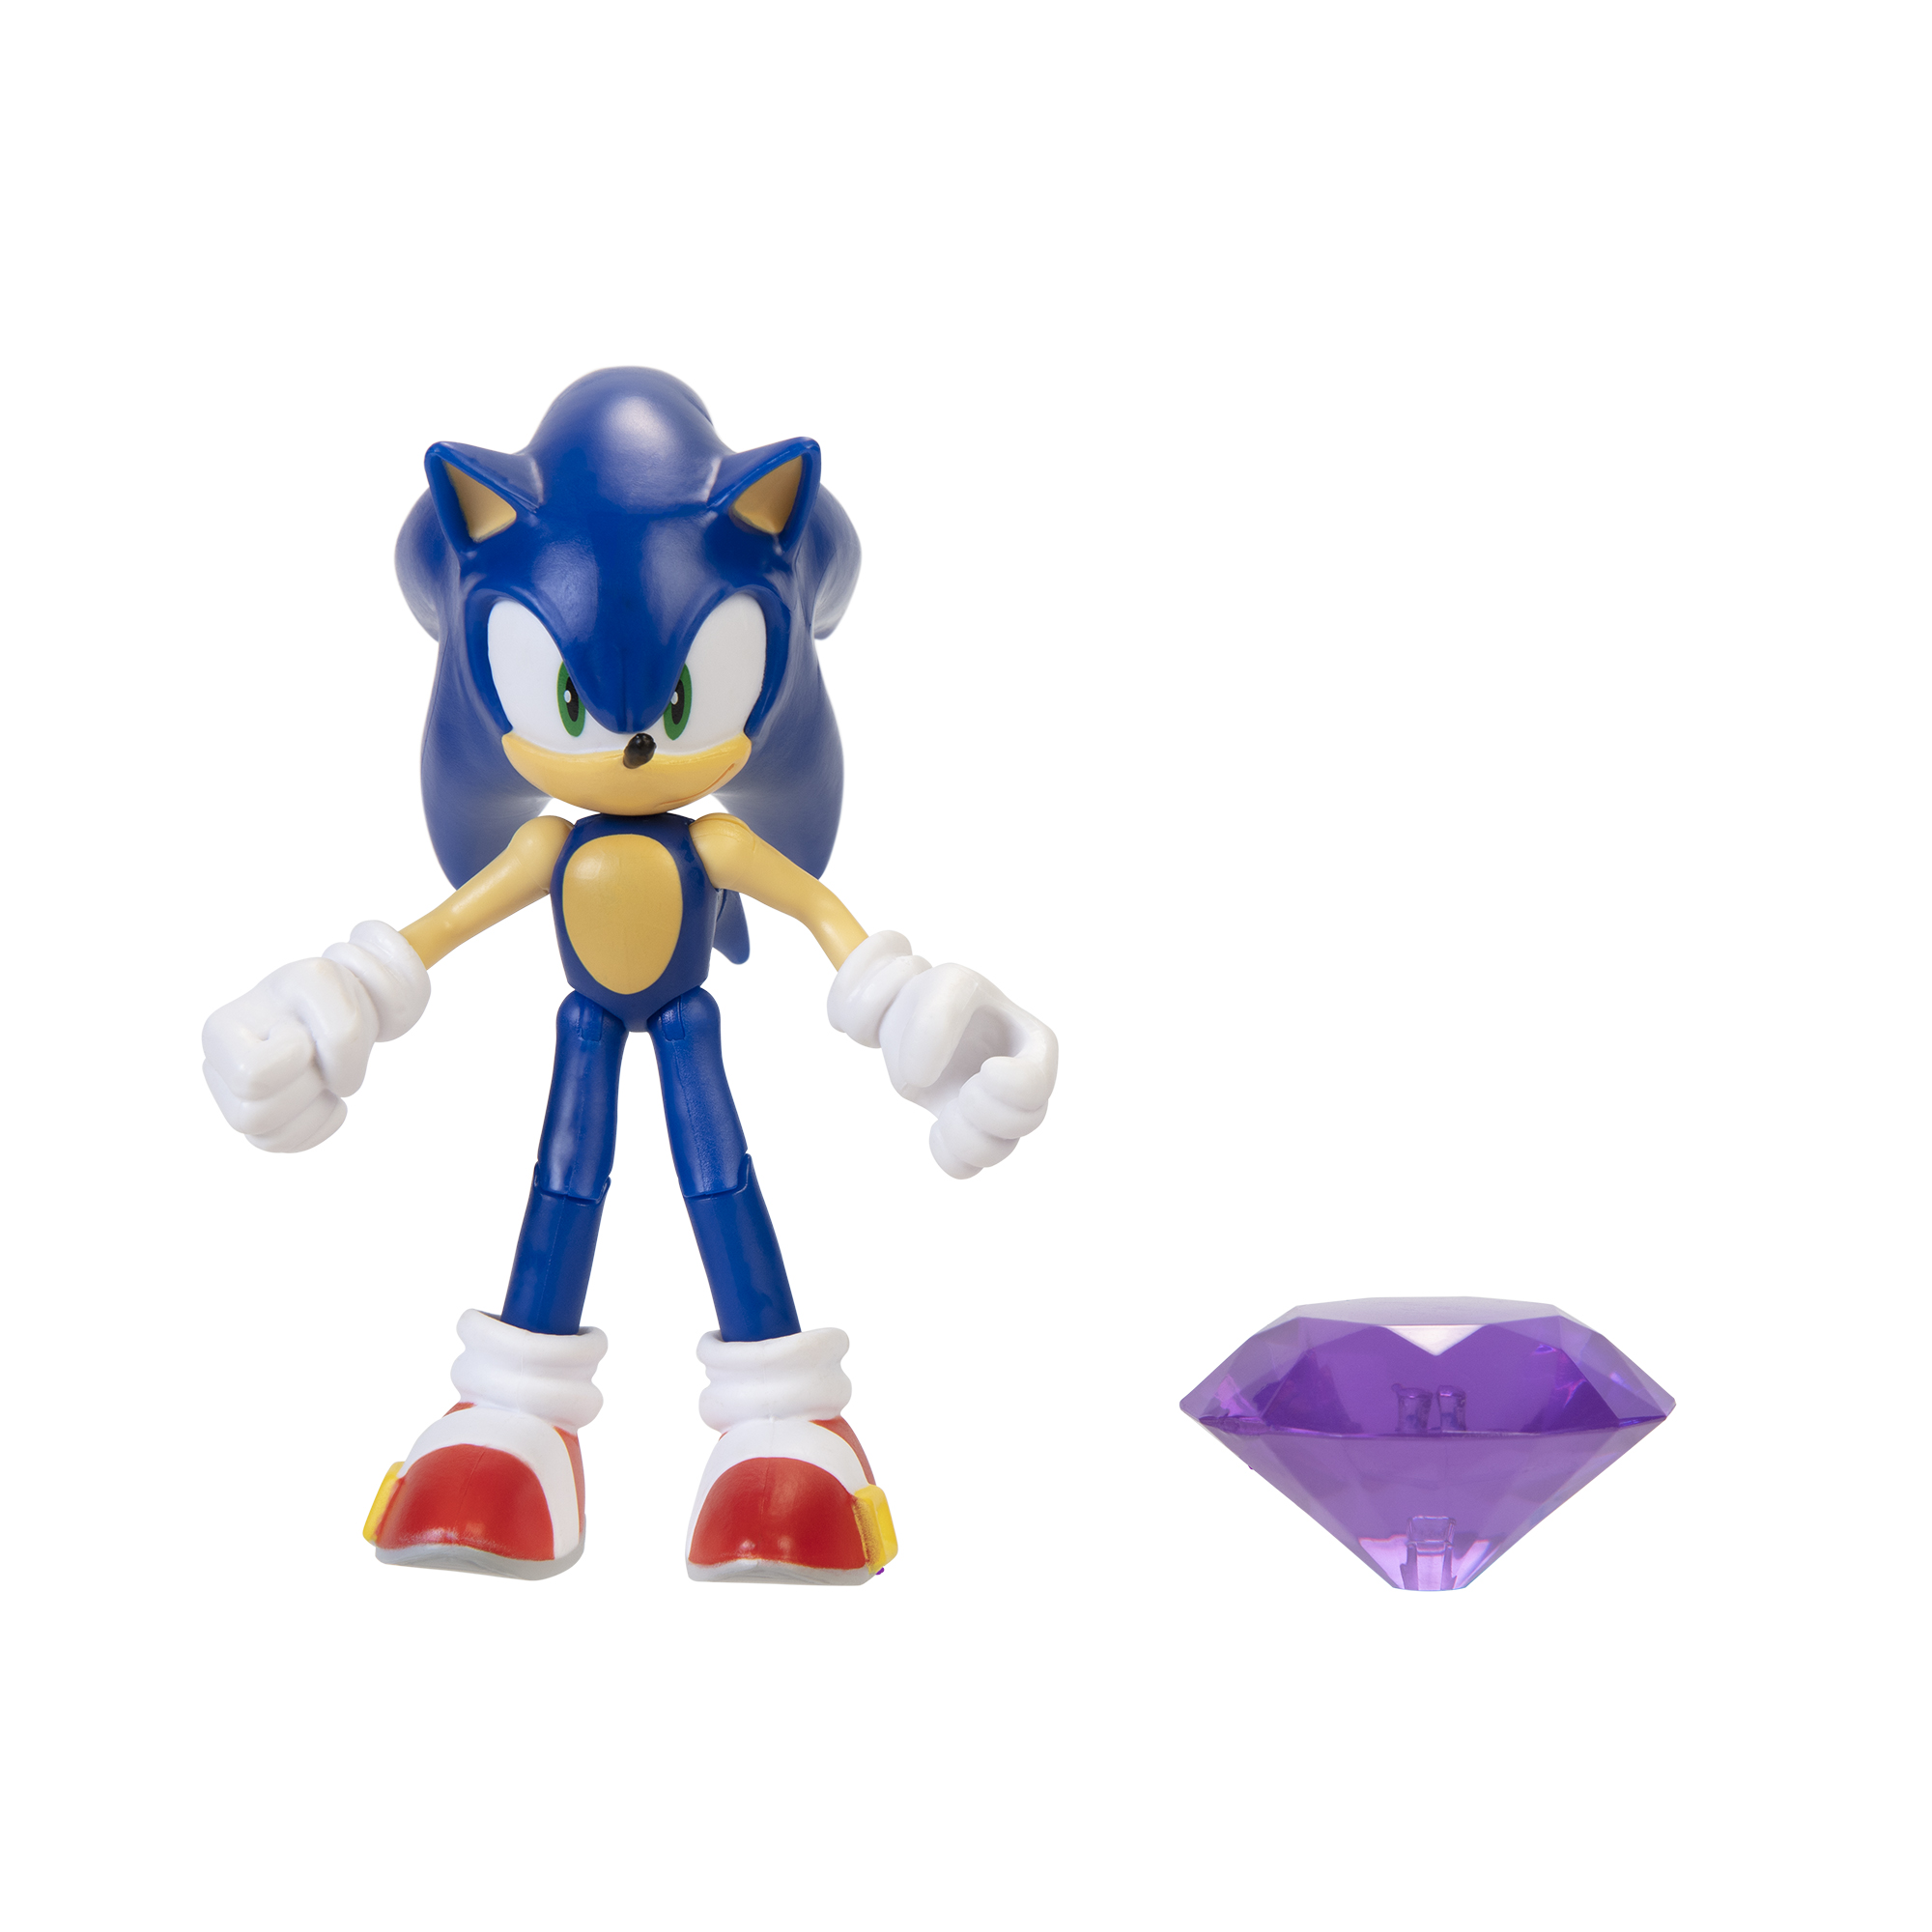 Sonic the Hedgehog 3 - Chaos Emeralds  Chaos emeralds, Sonic the hedgehog,  Sonic